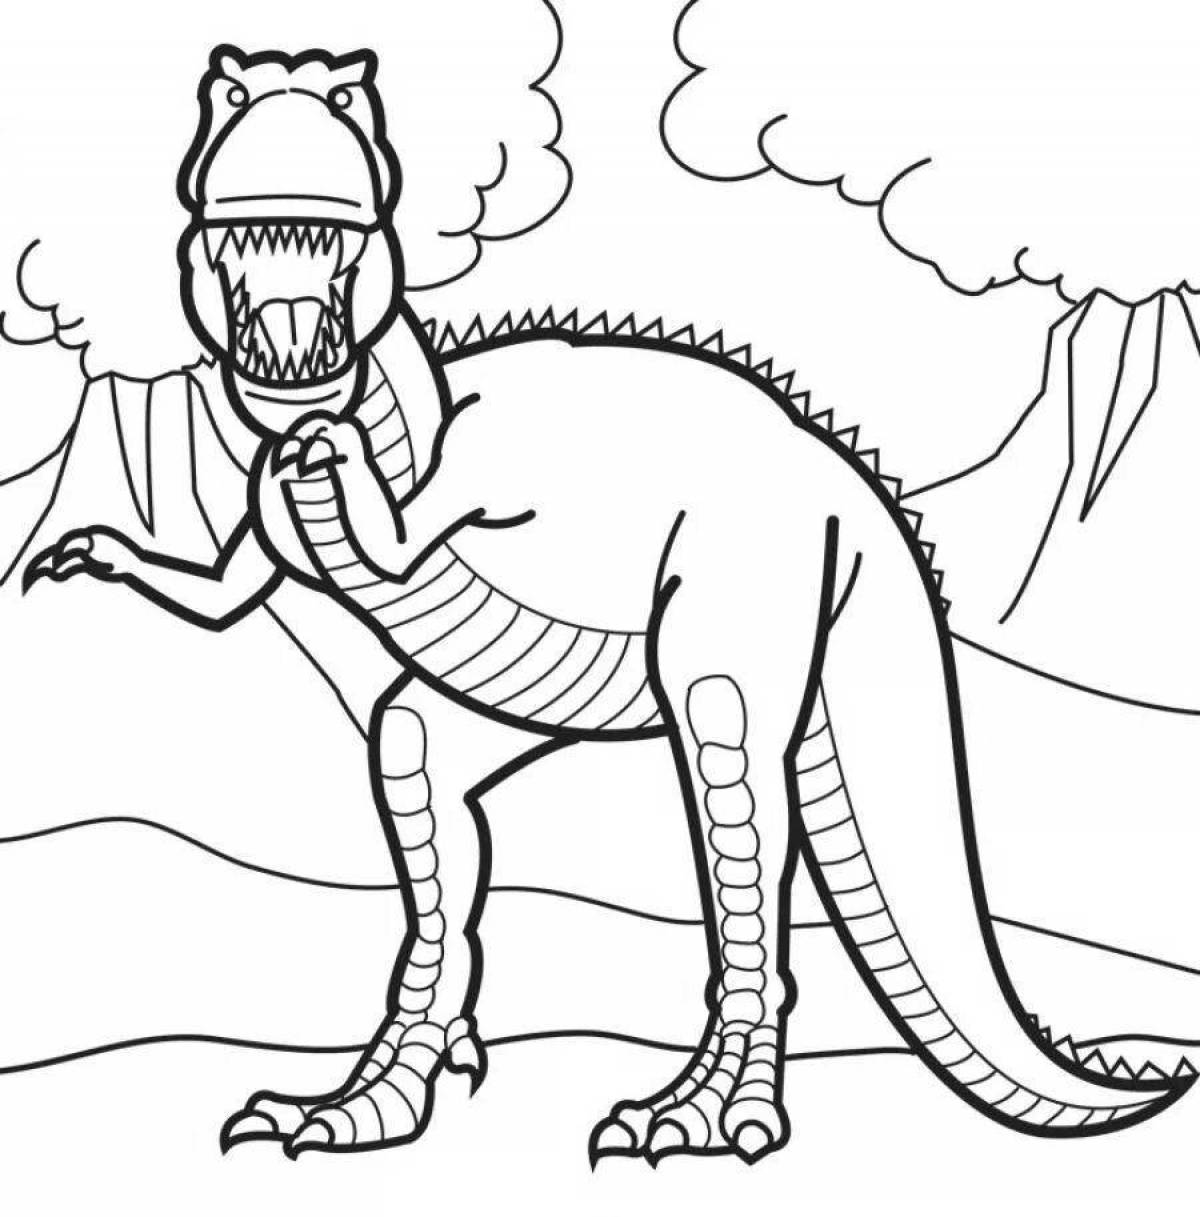 Coloring page energetic angry dinosaur